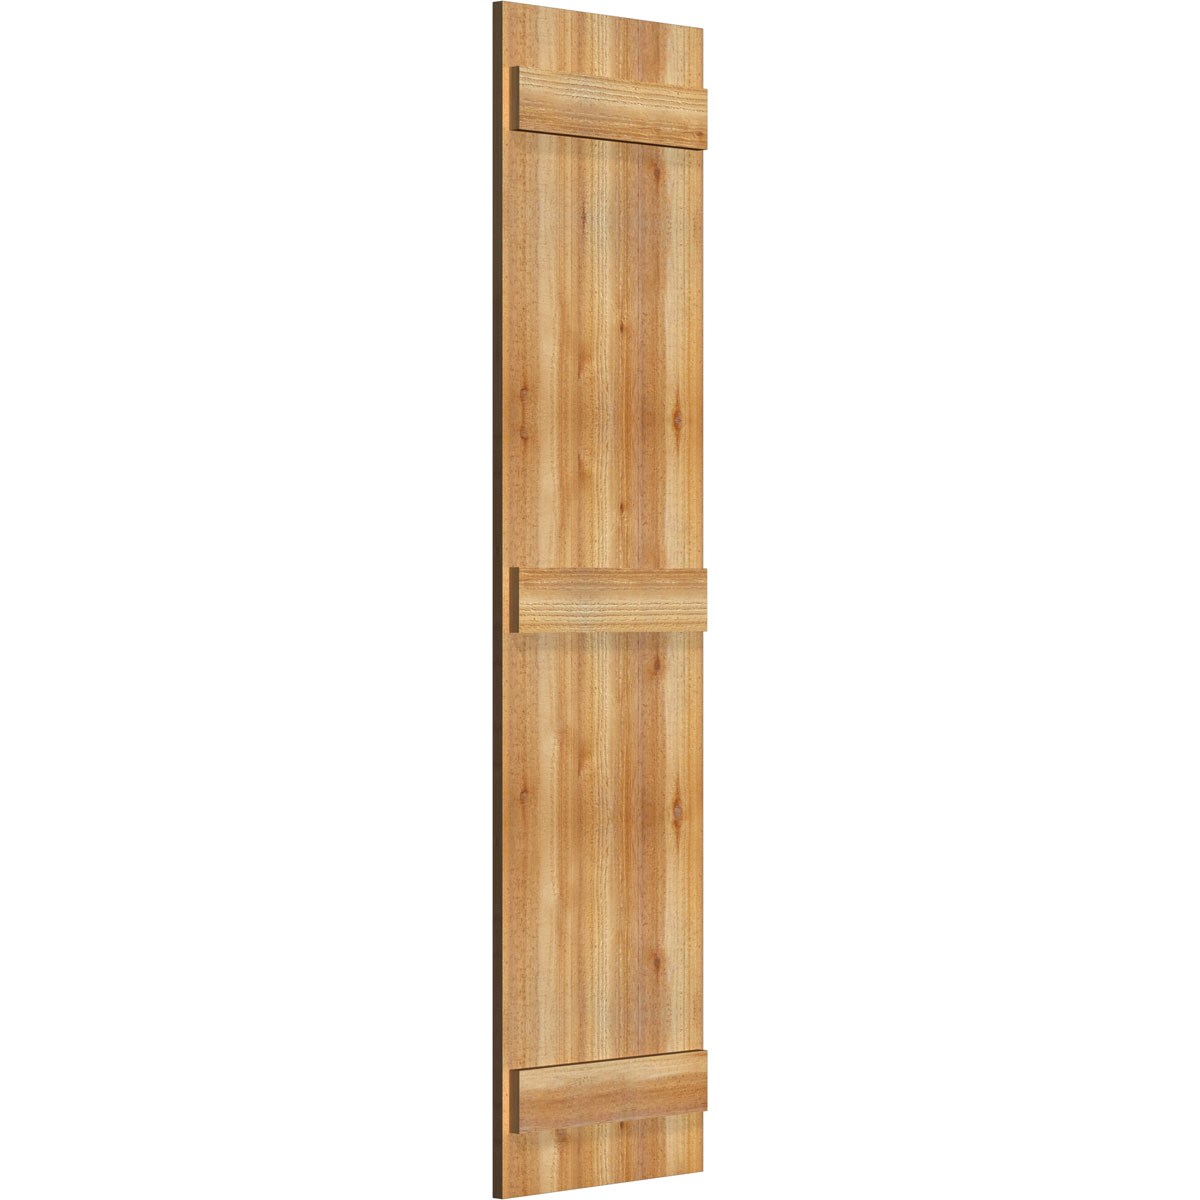 Ekena Millwork 2-Pack 16.125-in W x 64-in H Unfinished Board and Batten Wood Western Red cedar Exterior Shutters